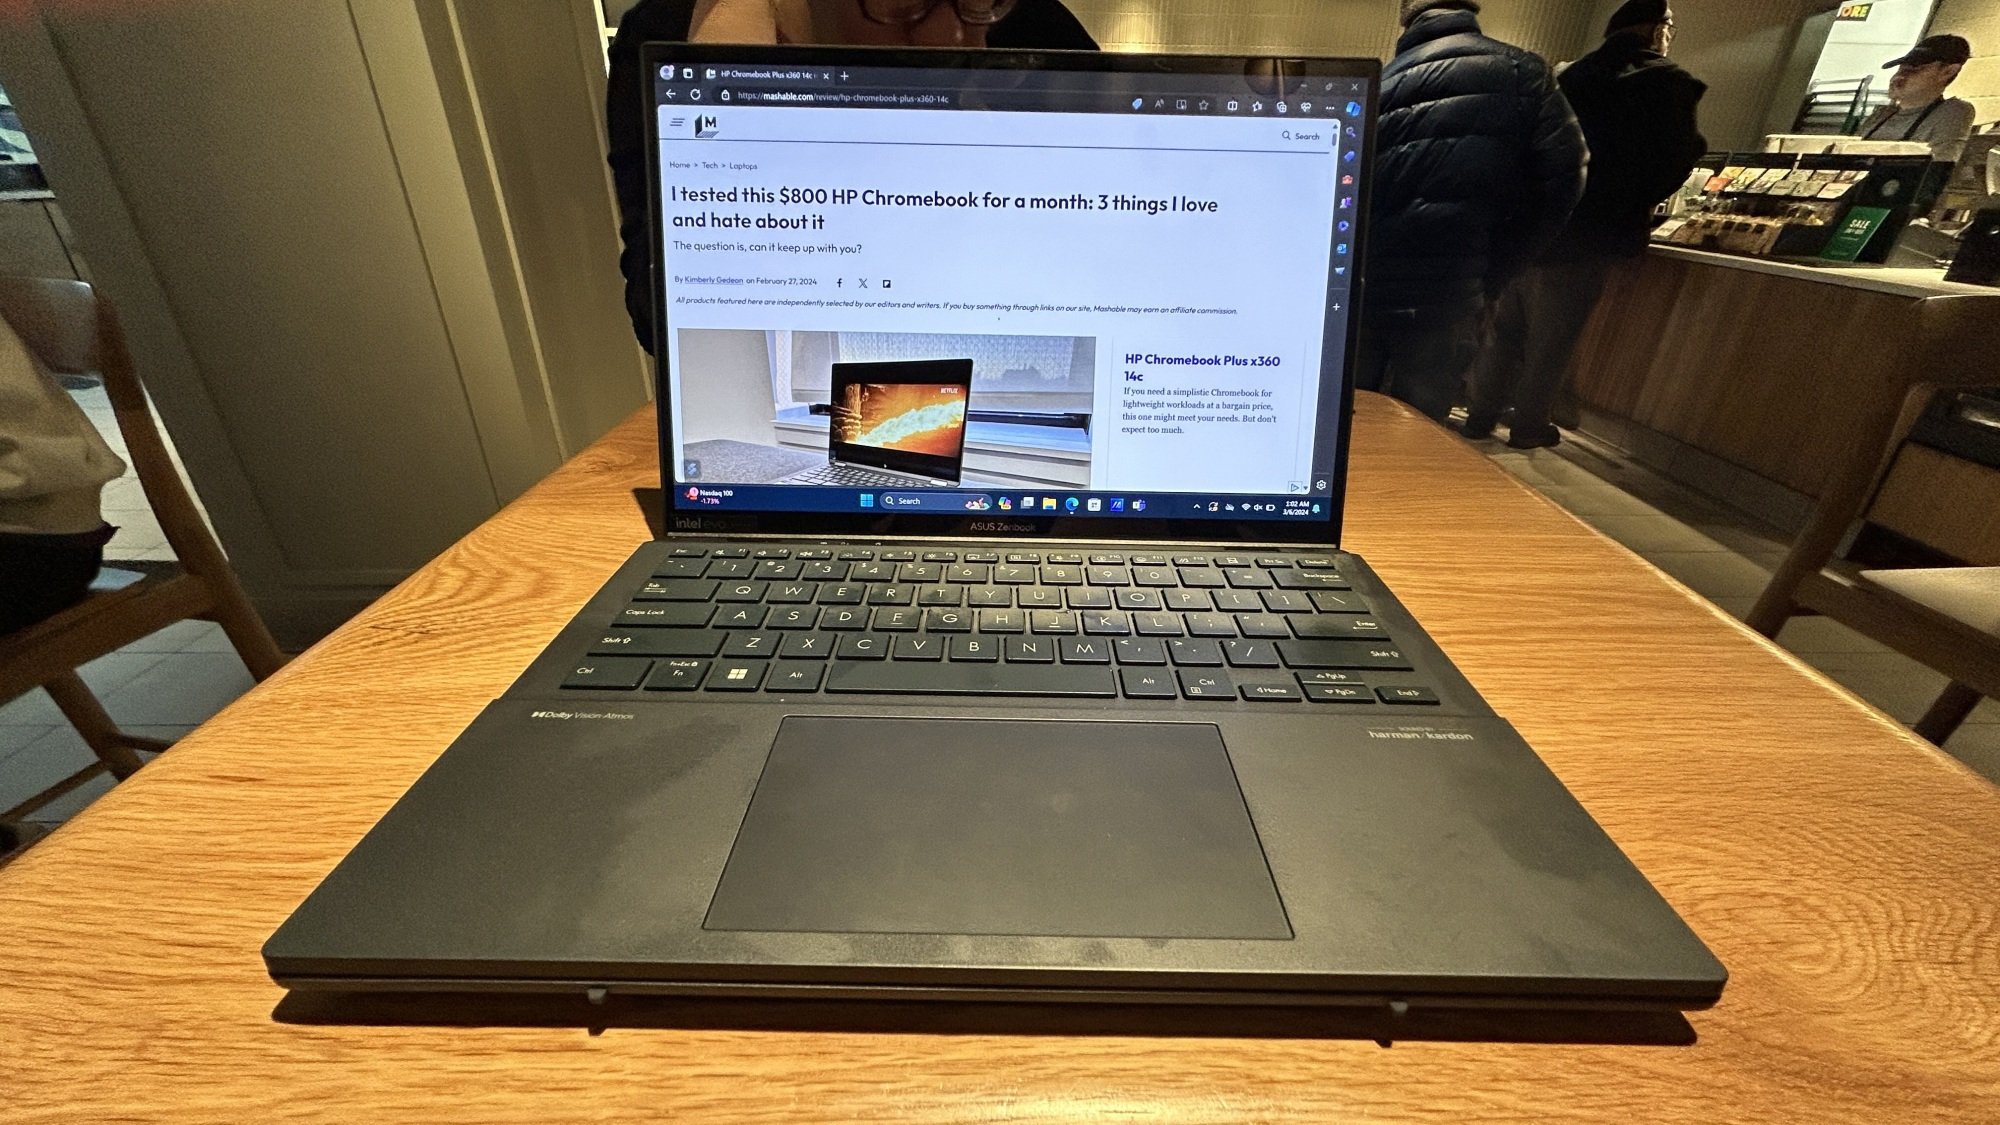 Asus Zenbook Duo in clamshell mode on a table